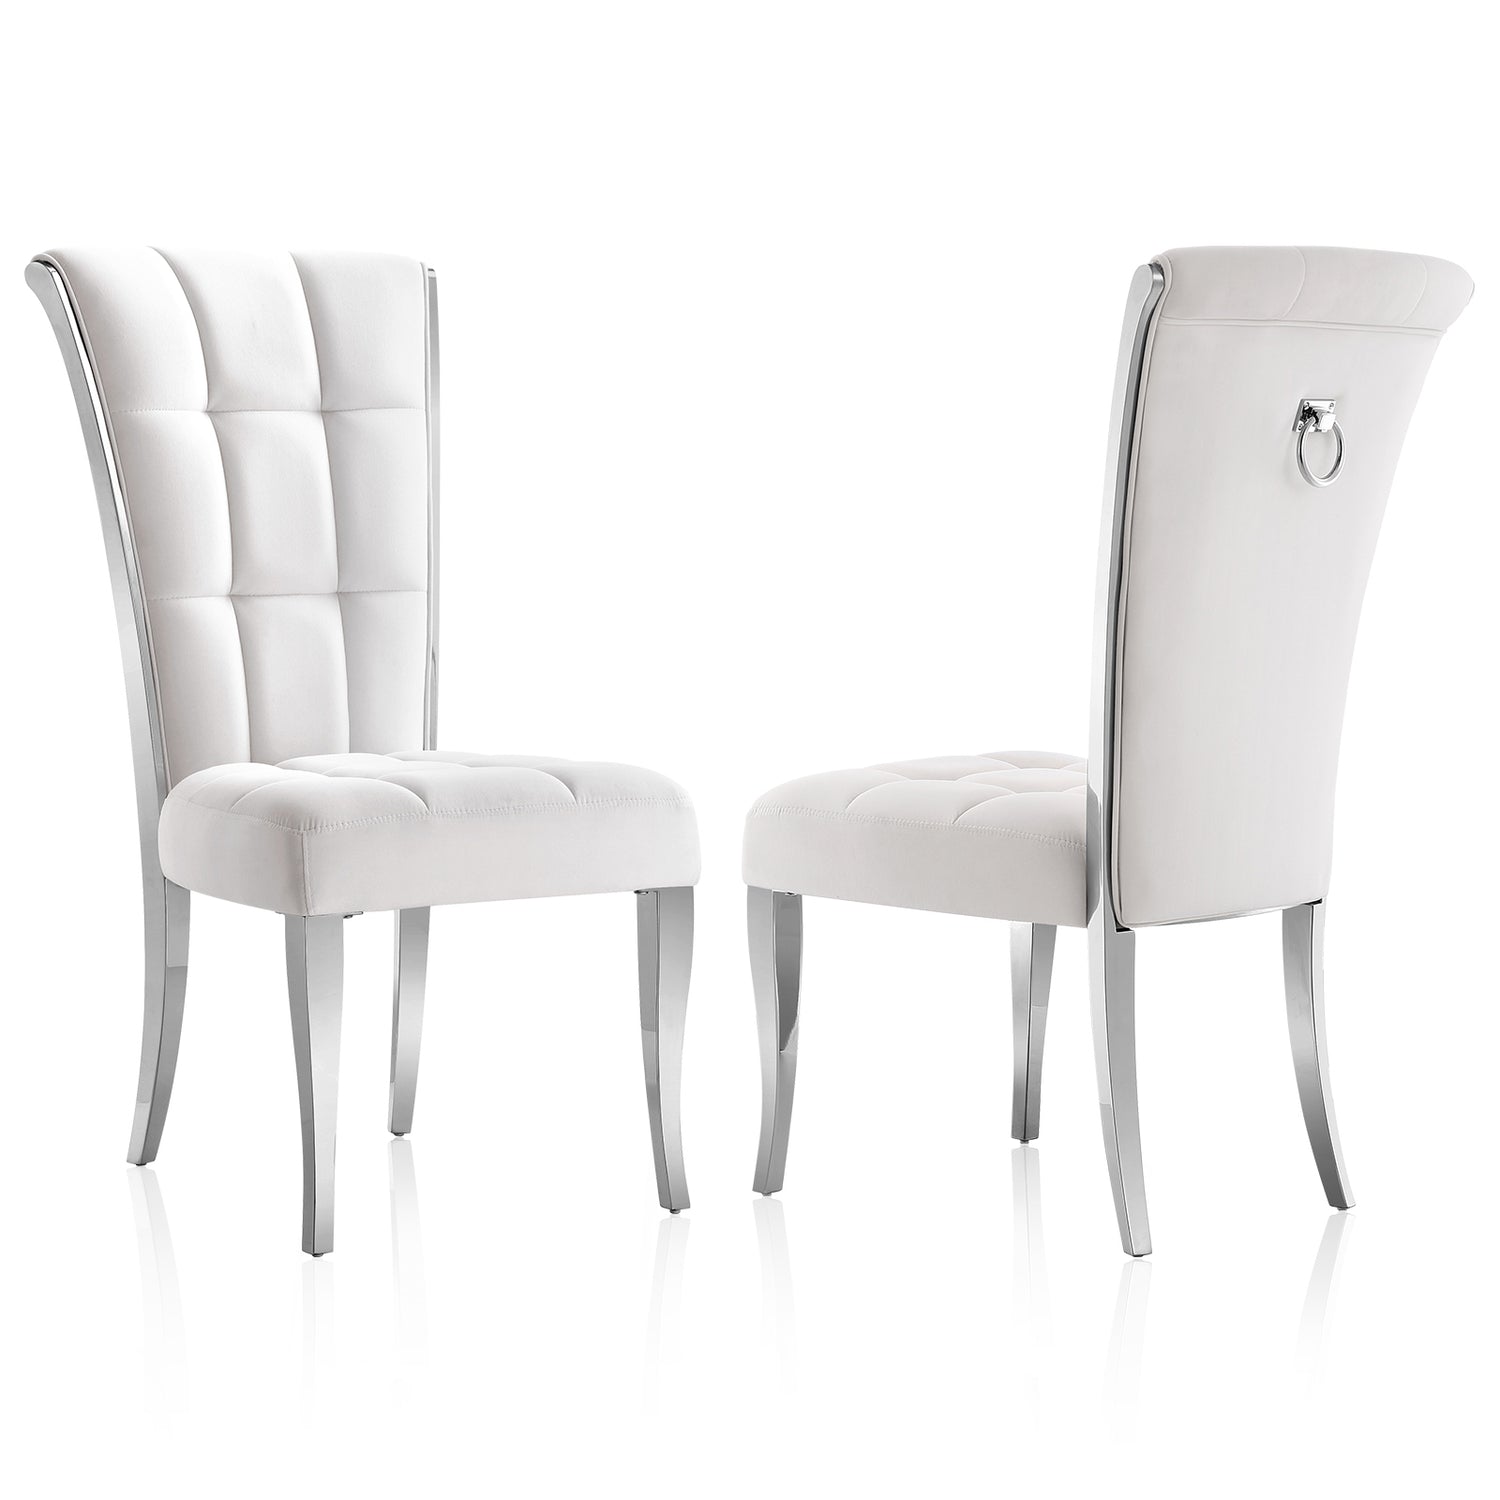 The Benefits of White Velvet Dining Chairs - Adding Value and Style to Your Home